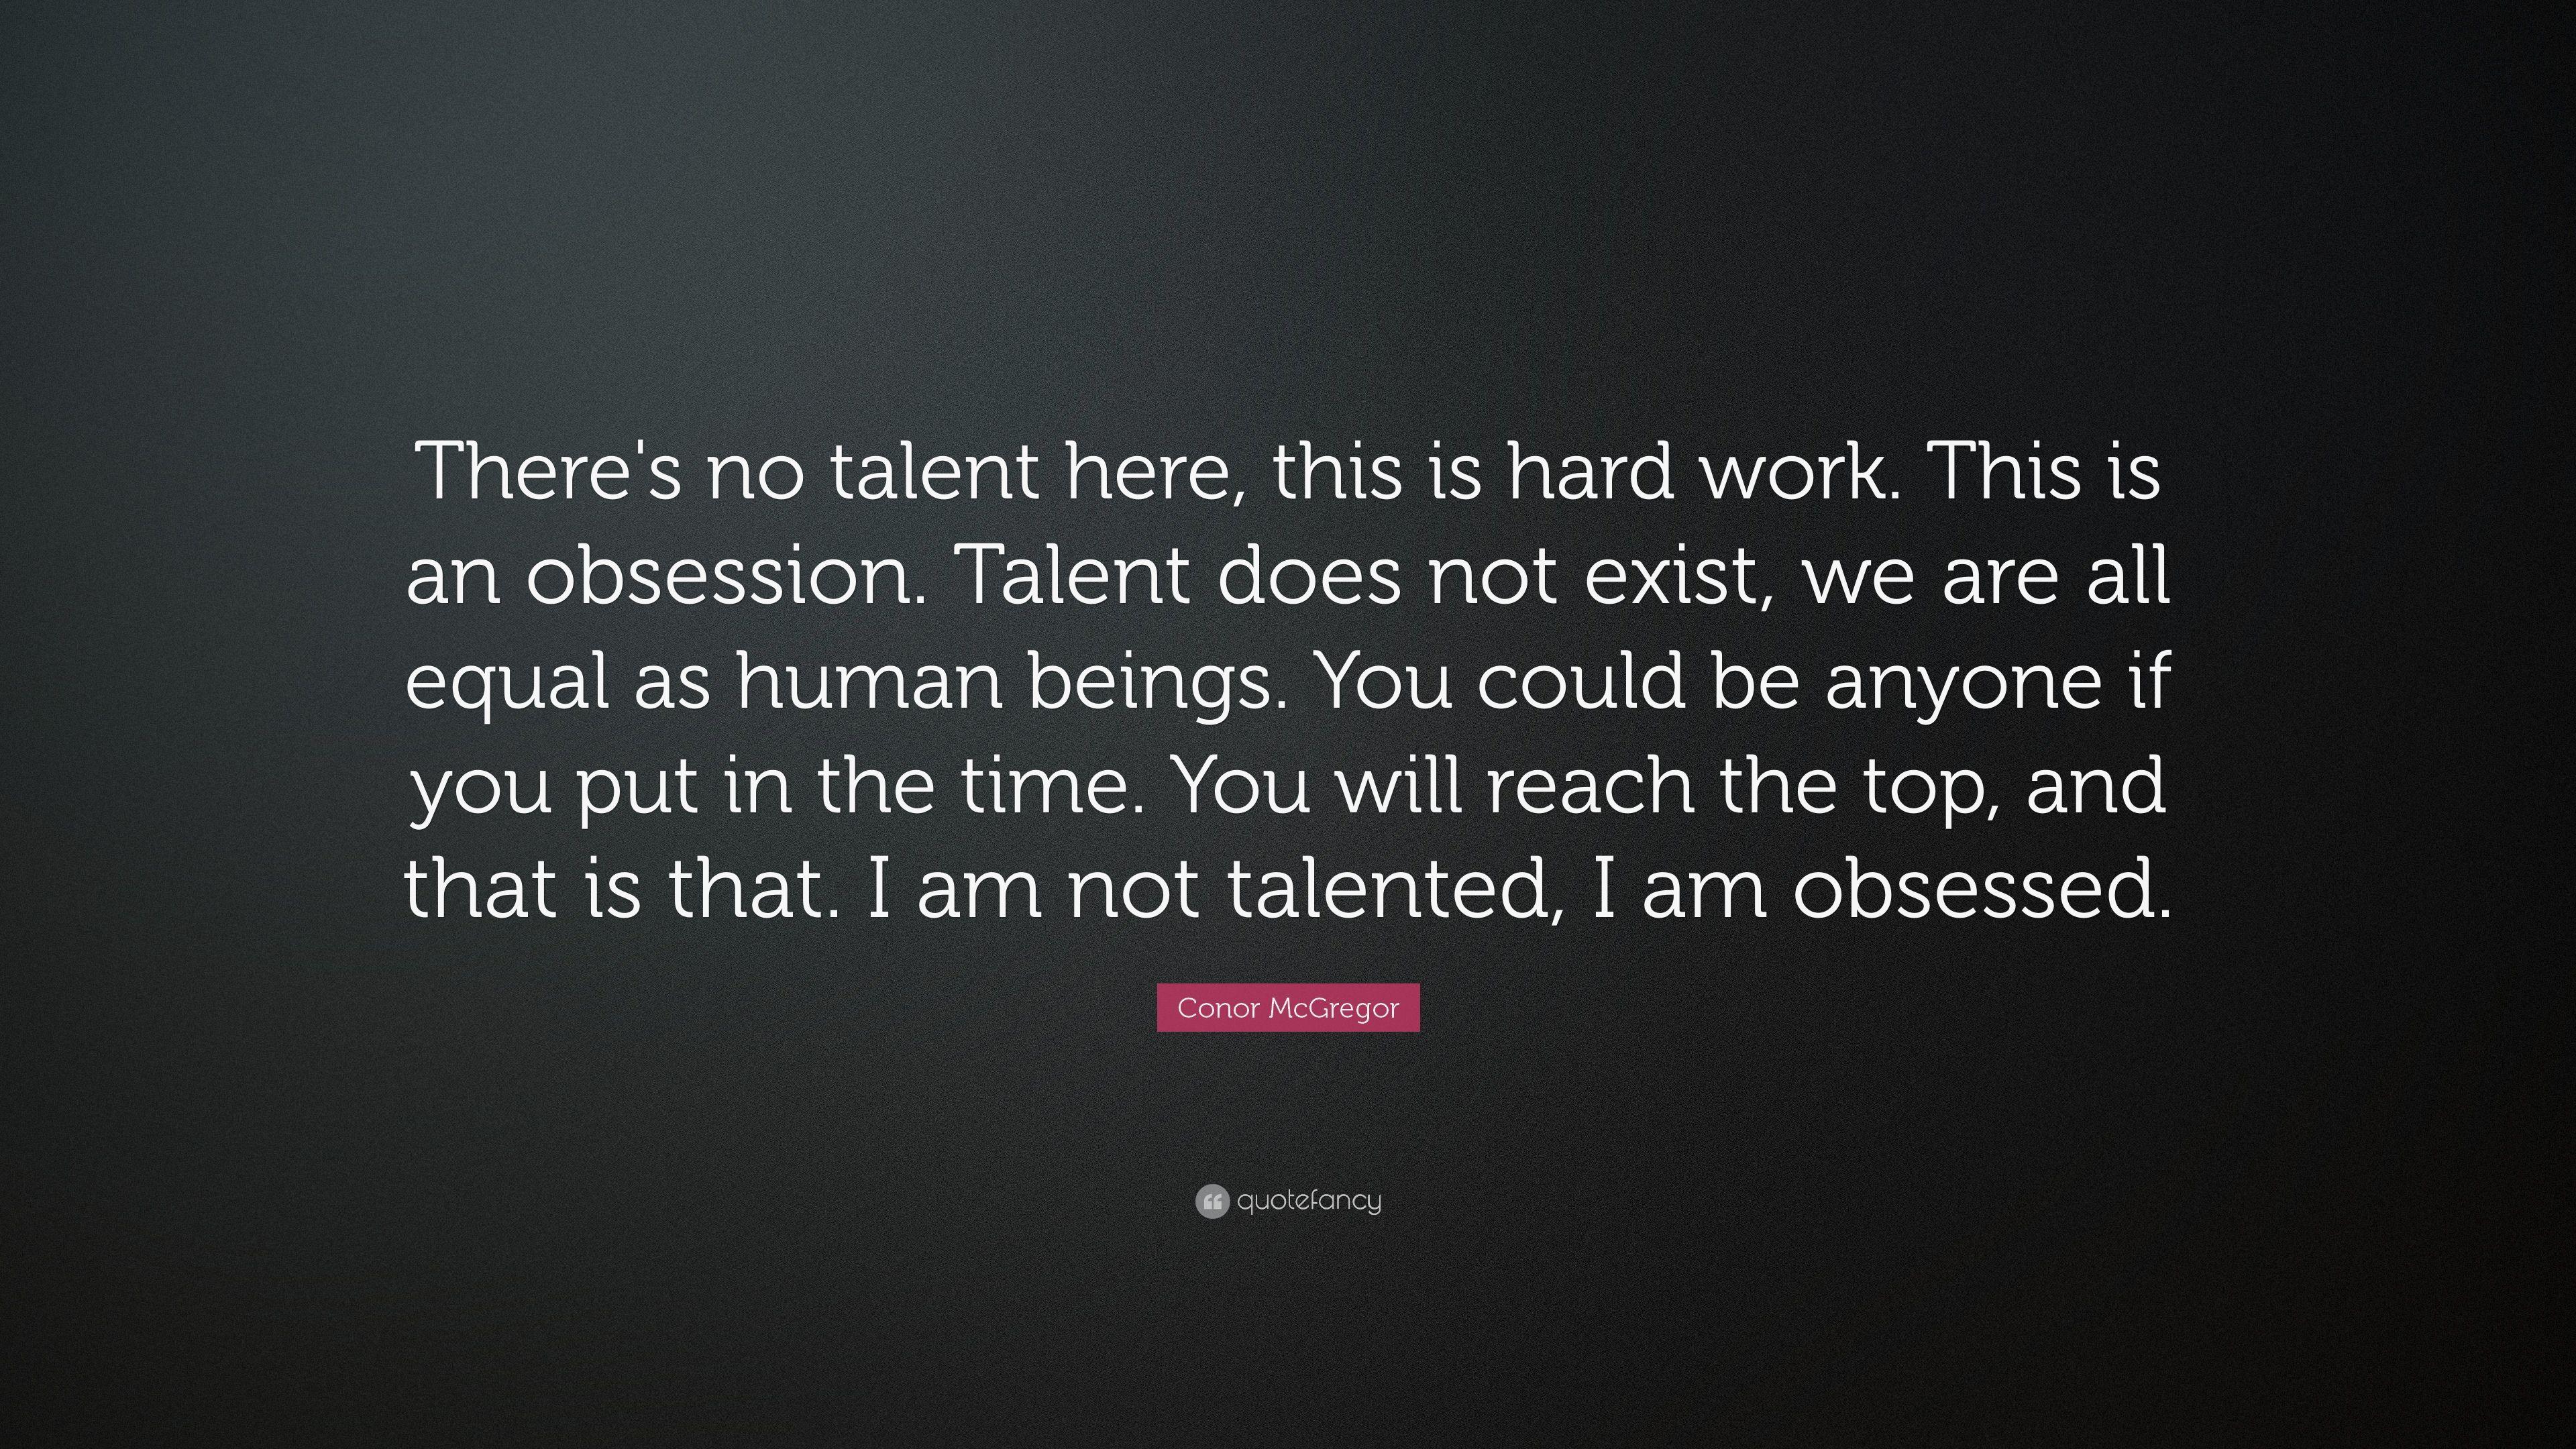 Conor McGregor Quote: "There's no talent here, this is hard work.